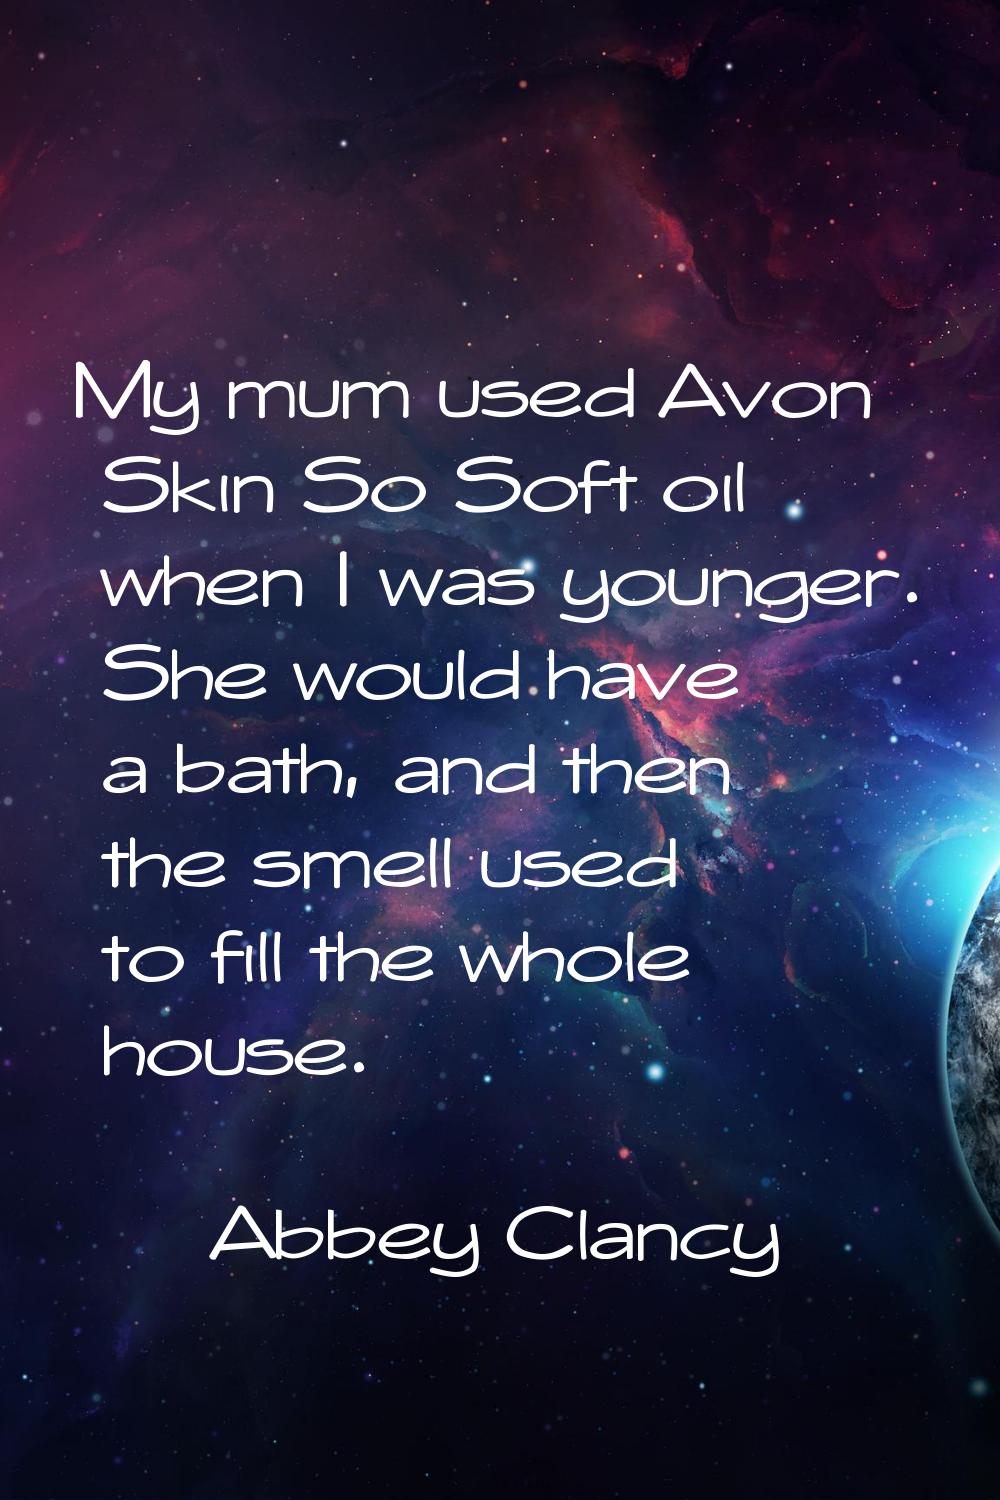 My mum used Avon Skin So Soft oil when I was younger. She would have a bath, and then the smell use